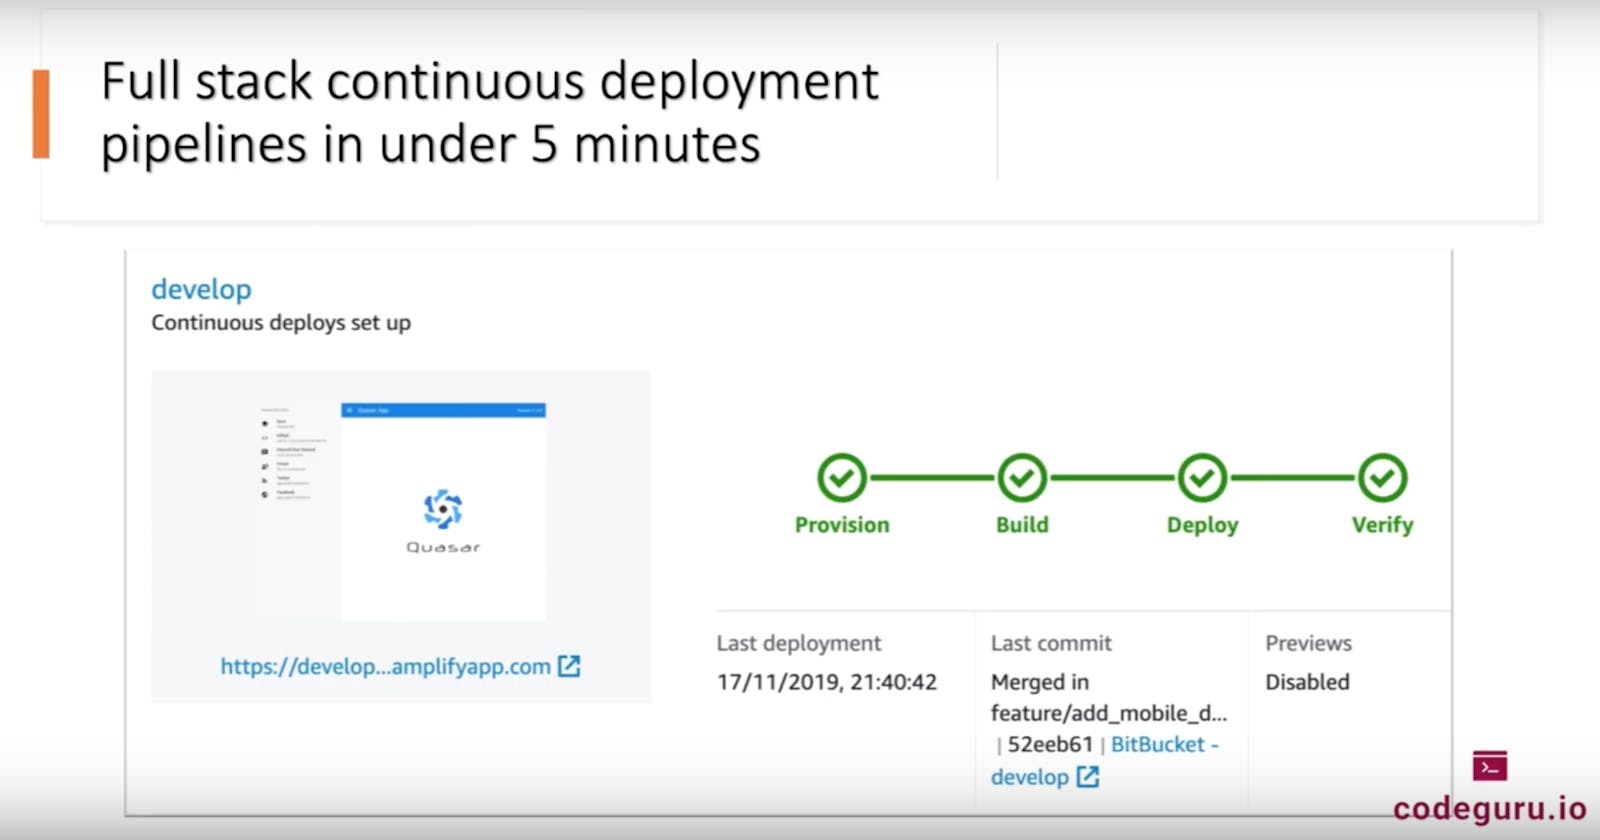 How to create continuous deployment pipeline for quasar app in under 5 minutes using aws-amplify